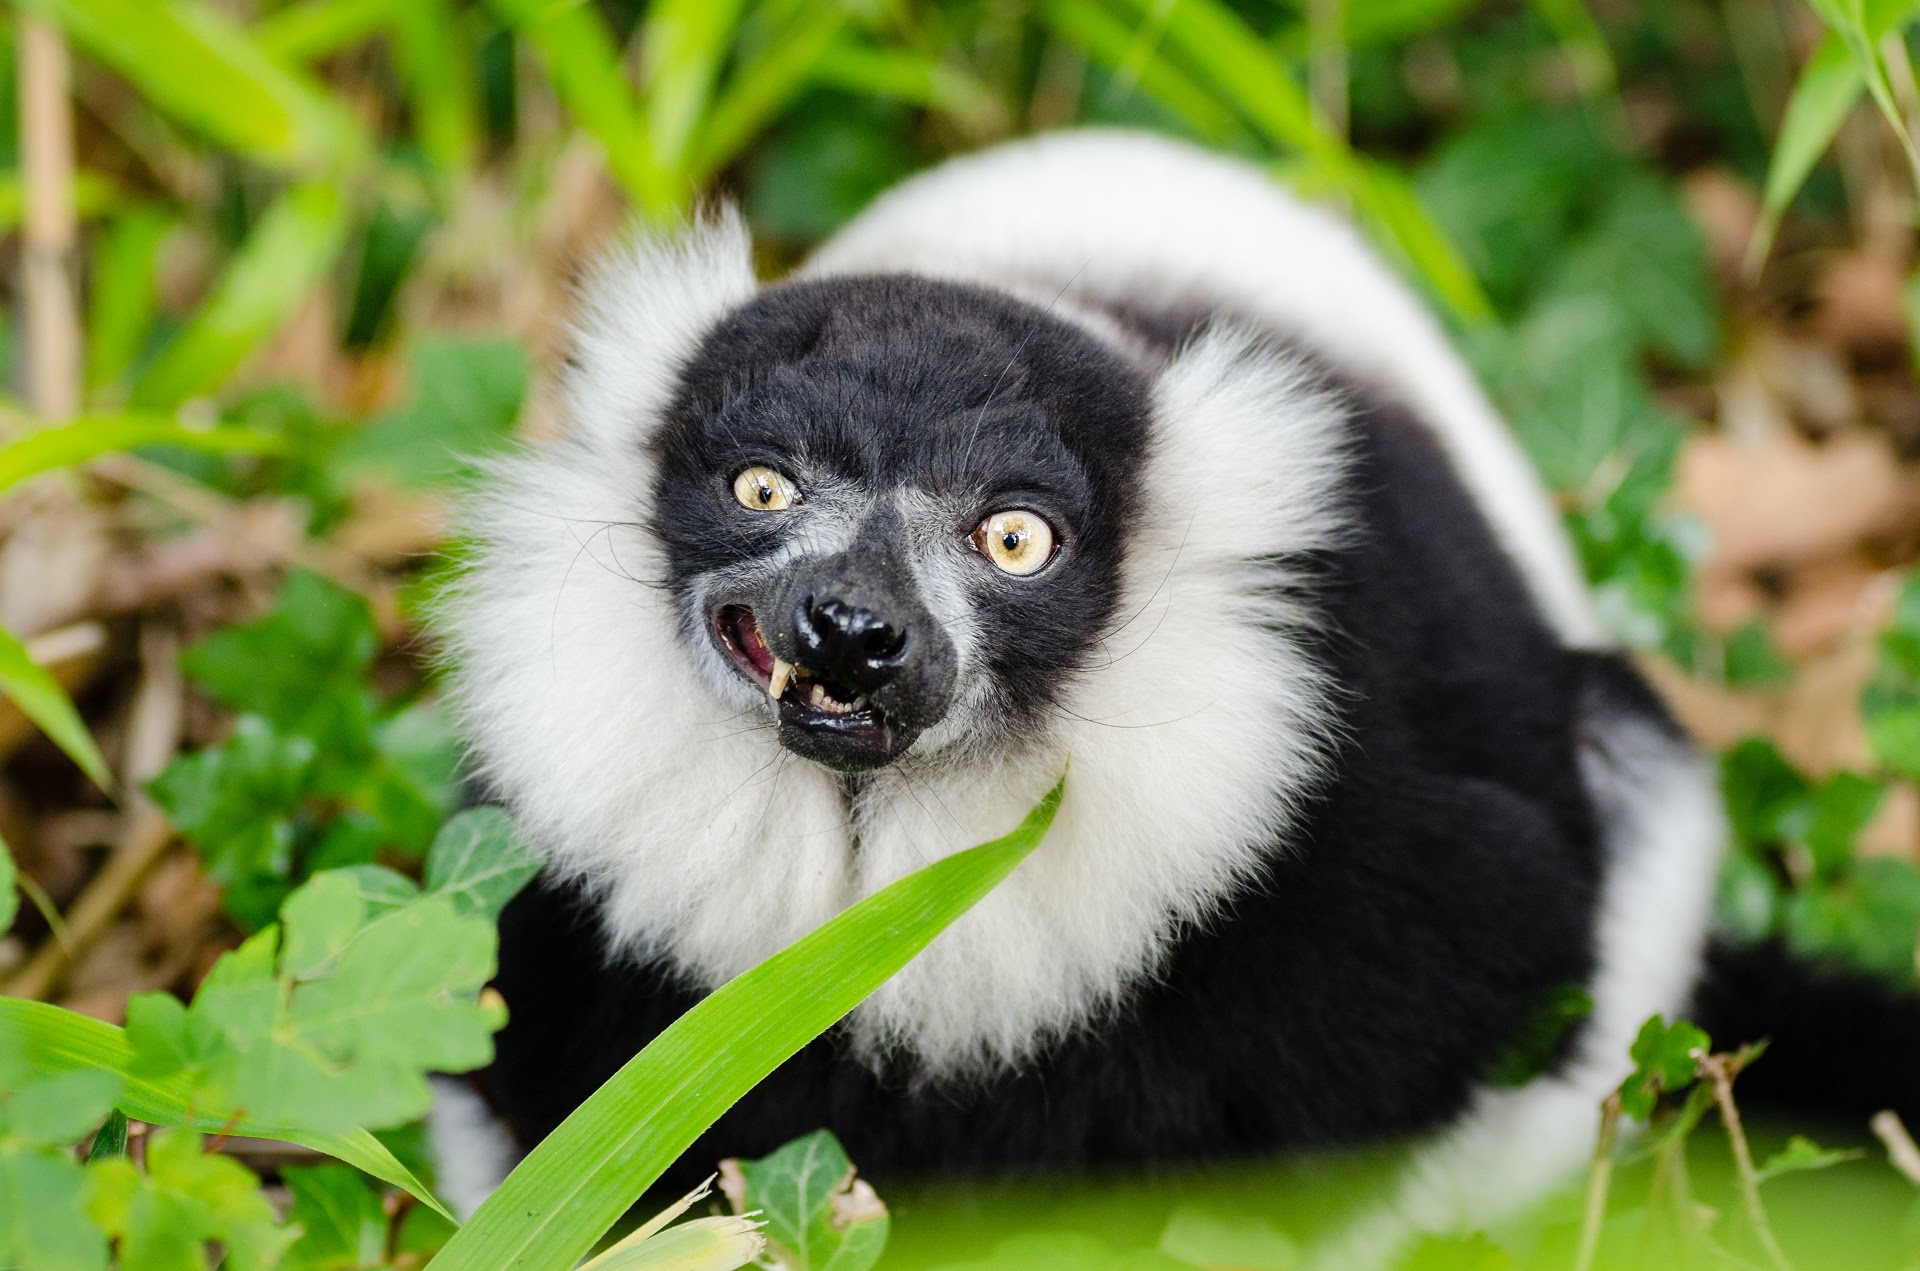 Eaten alive by a black and white ruffed lemur - YouTube